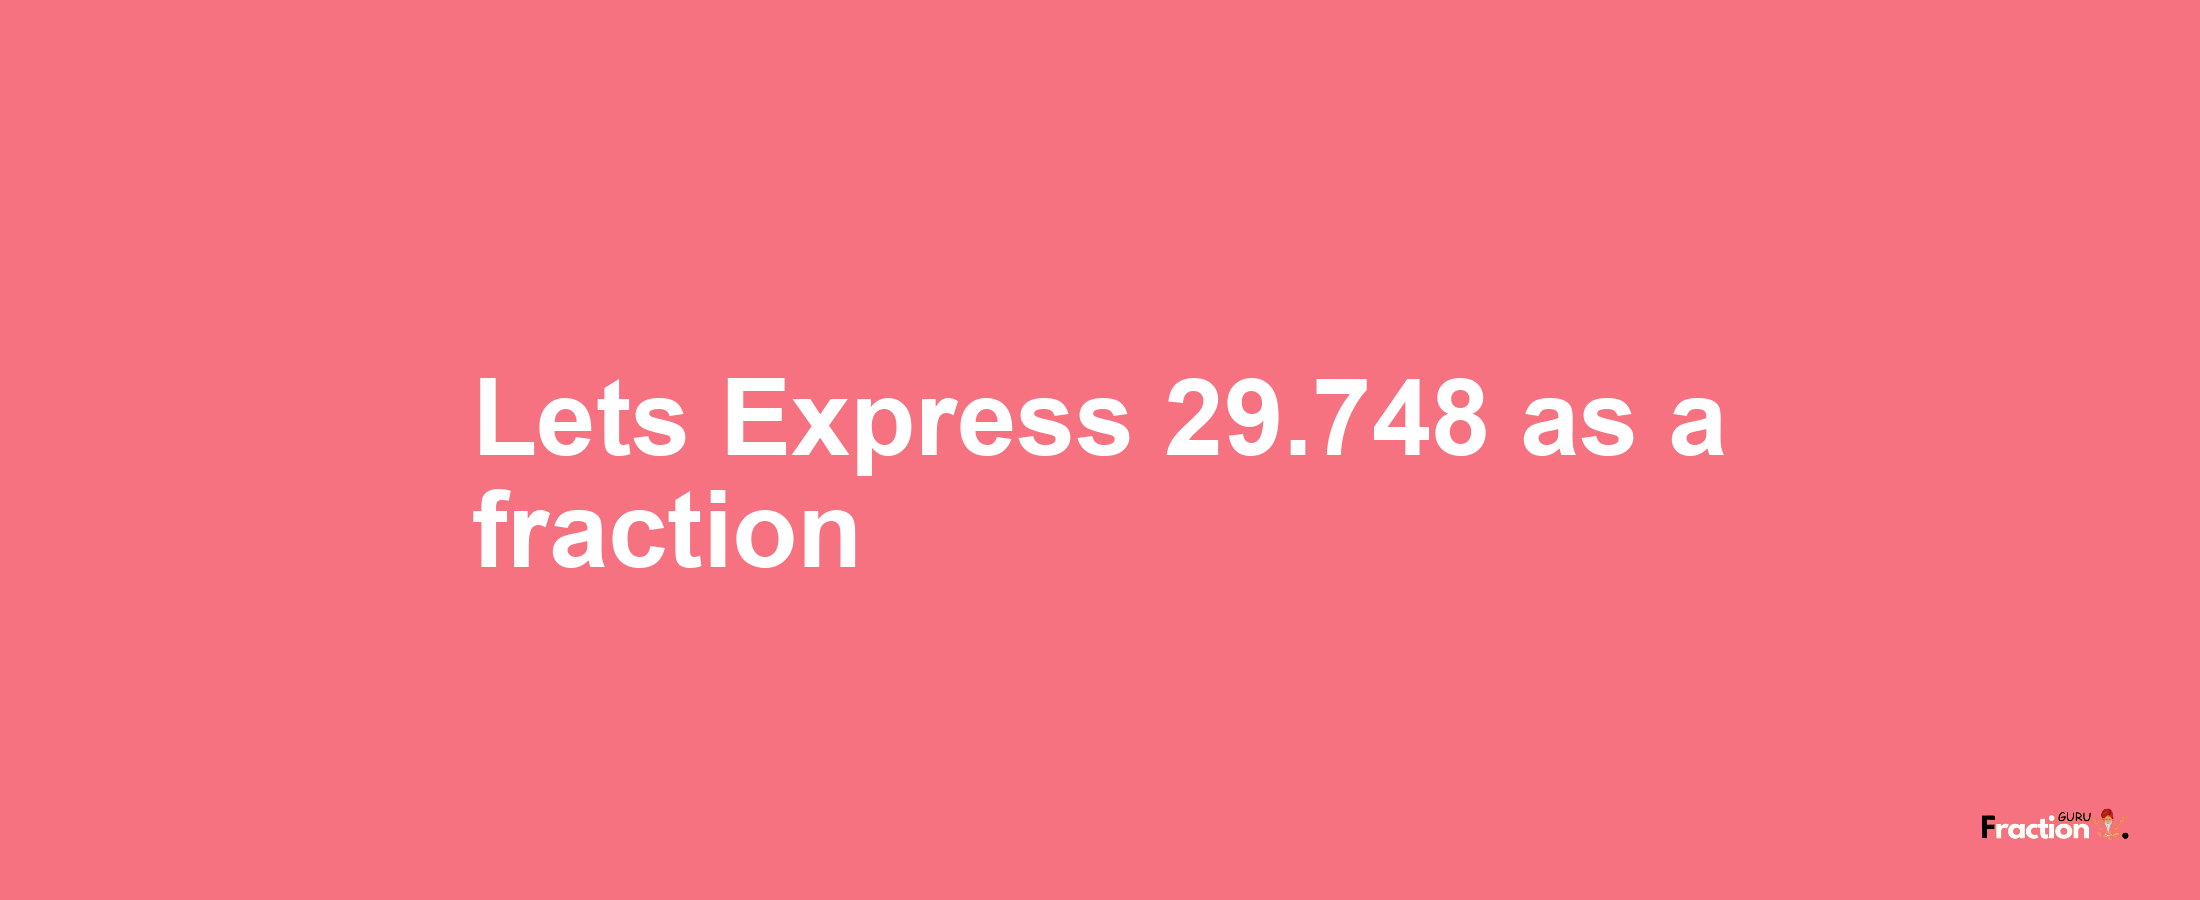 Lets Express 29.748 as afraction